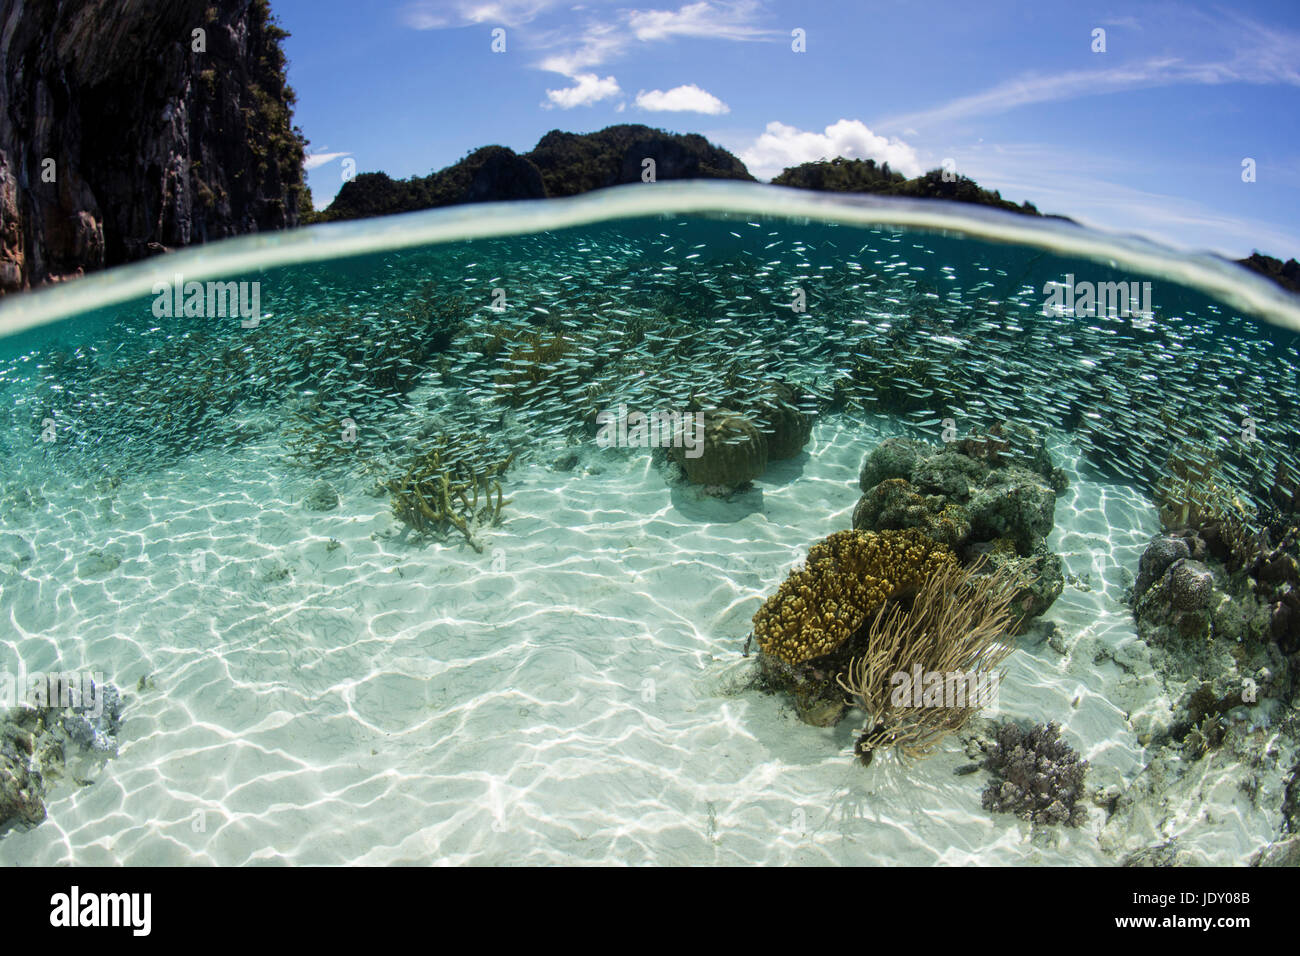 Silversides schooling in shallow Waters, Atherinidae, Raja Ampat, West Papua, Indonesia Stock Photo